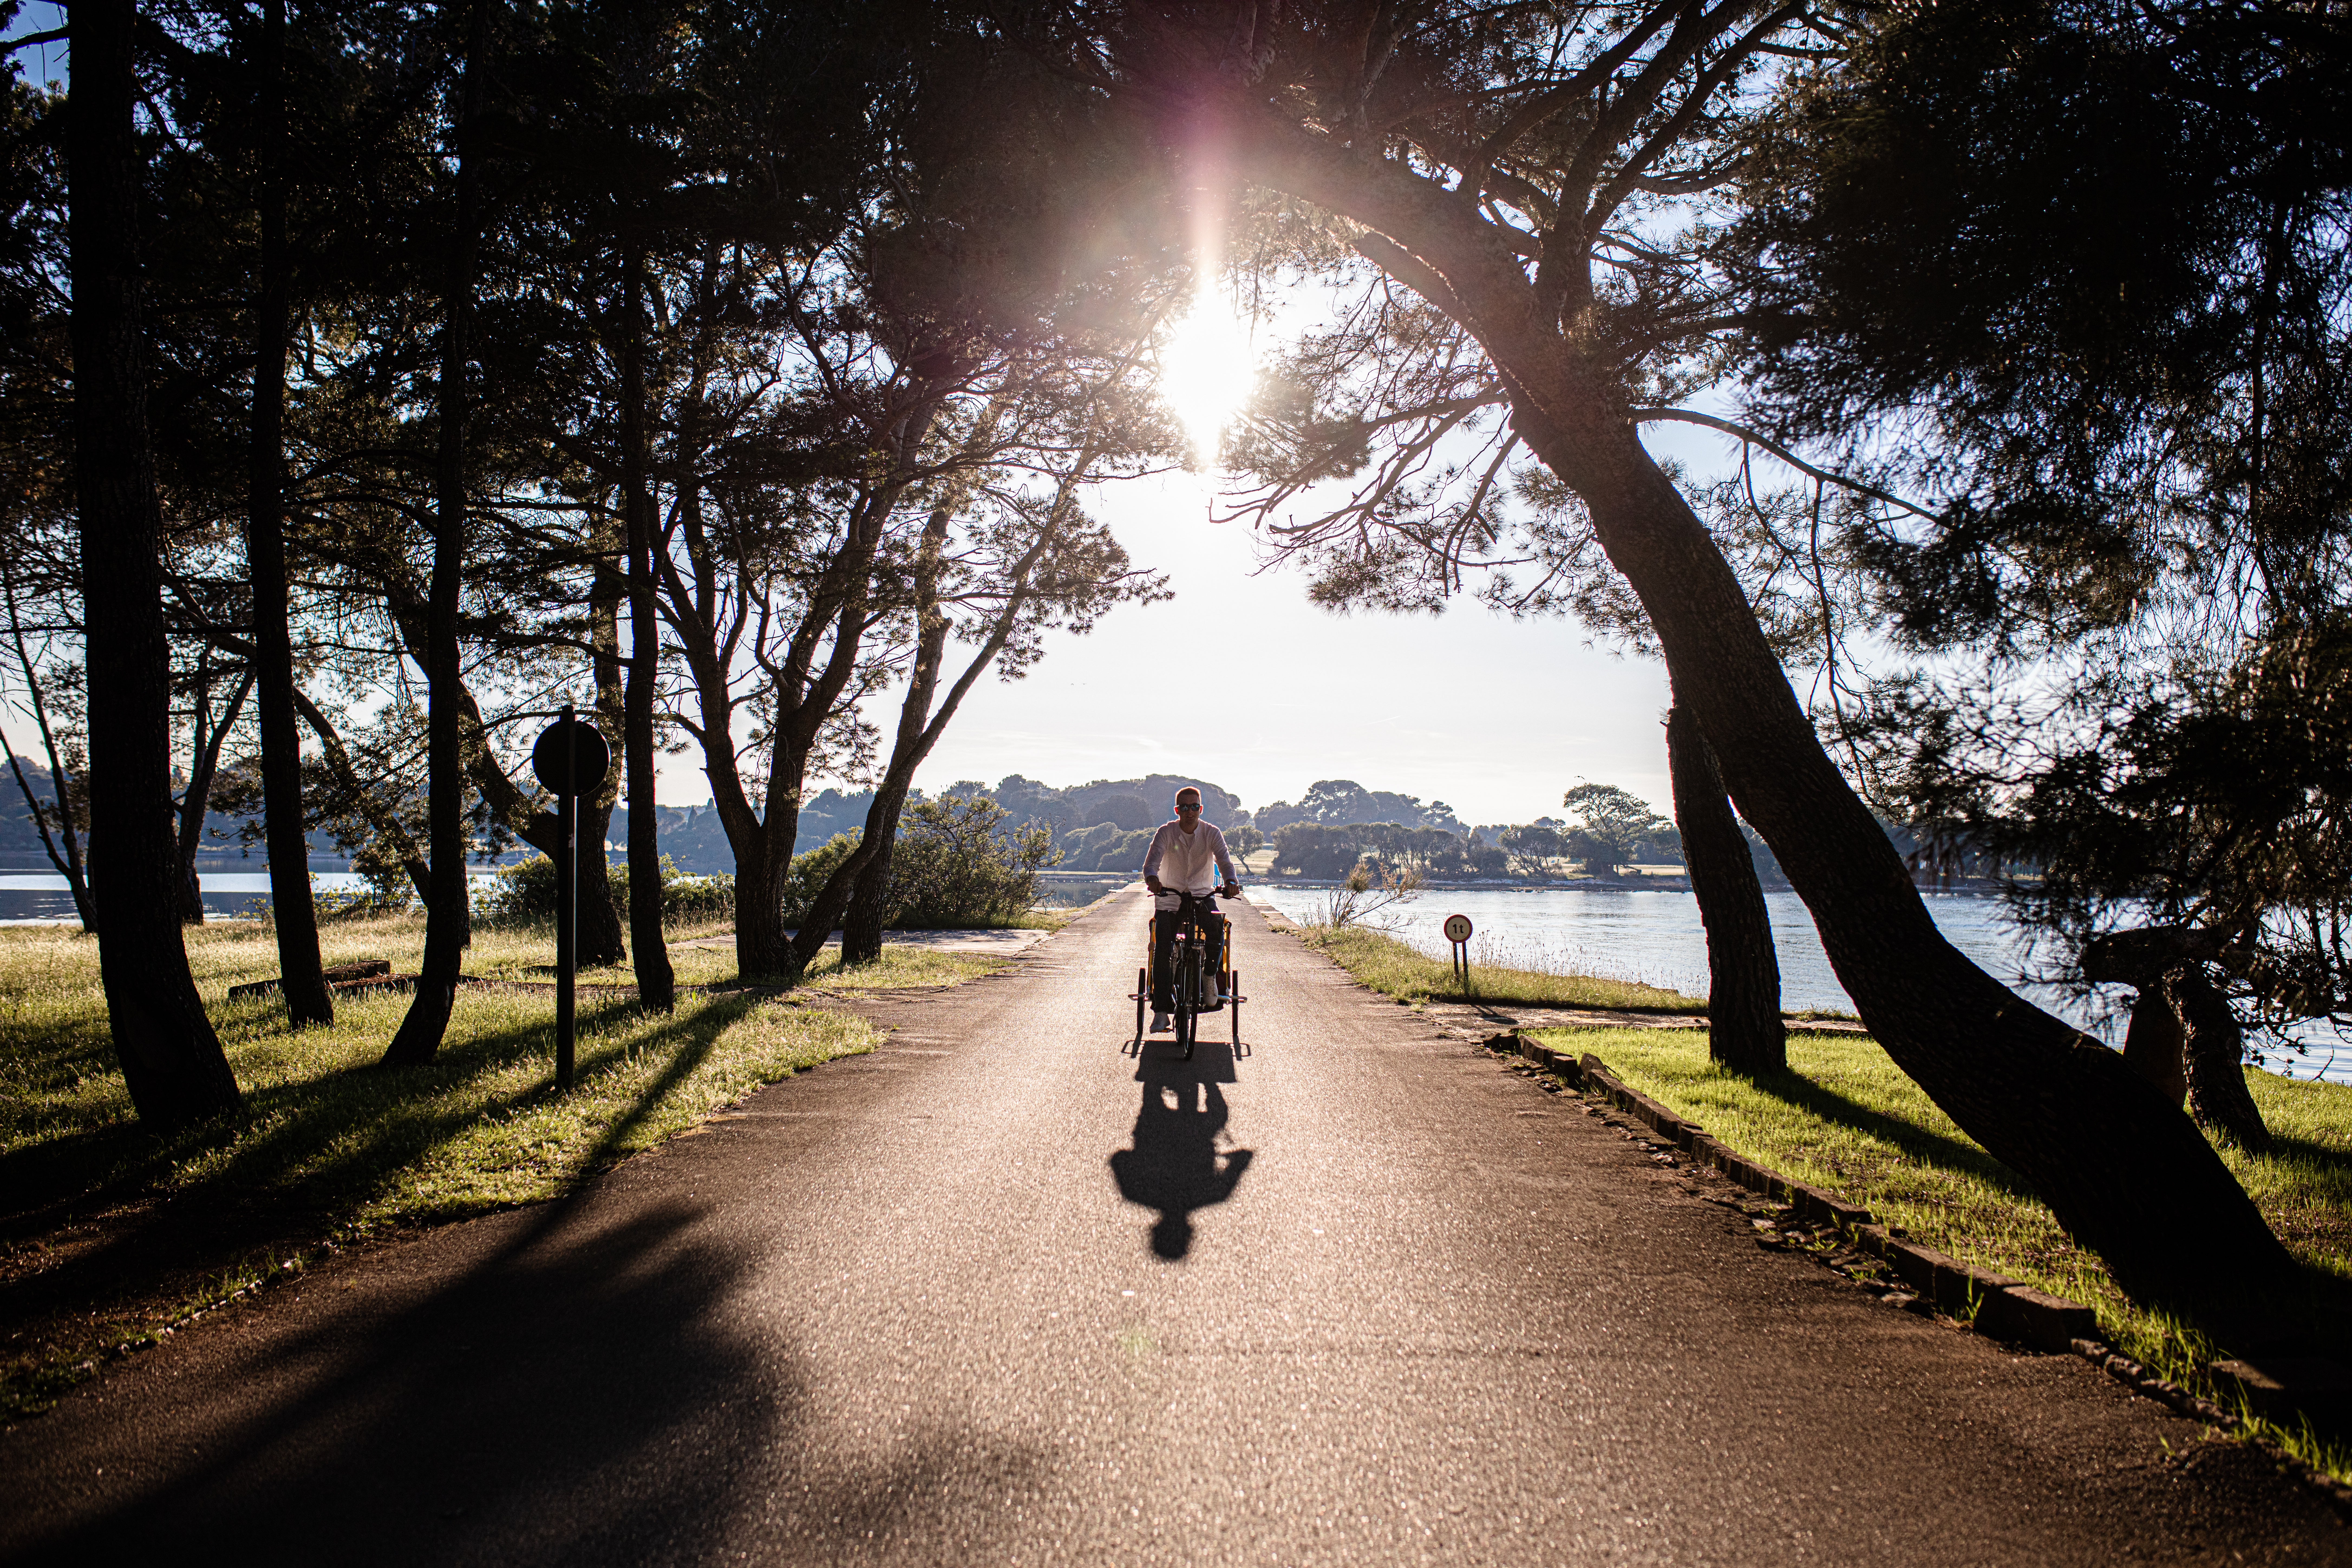 Explore the island’s trails by bike or on foot